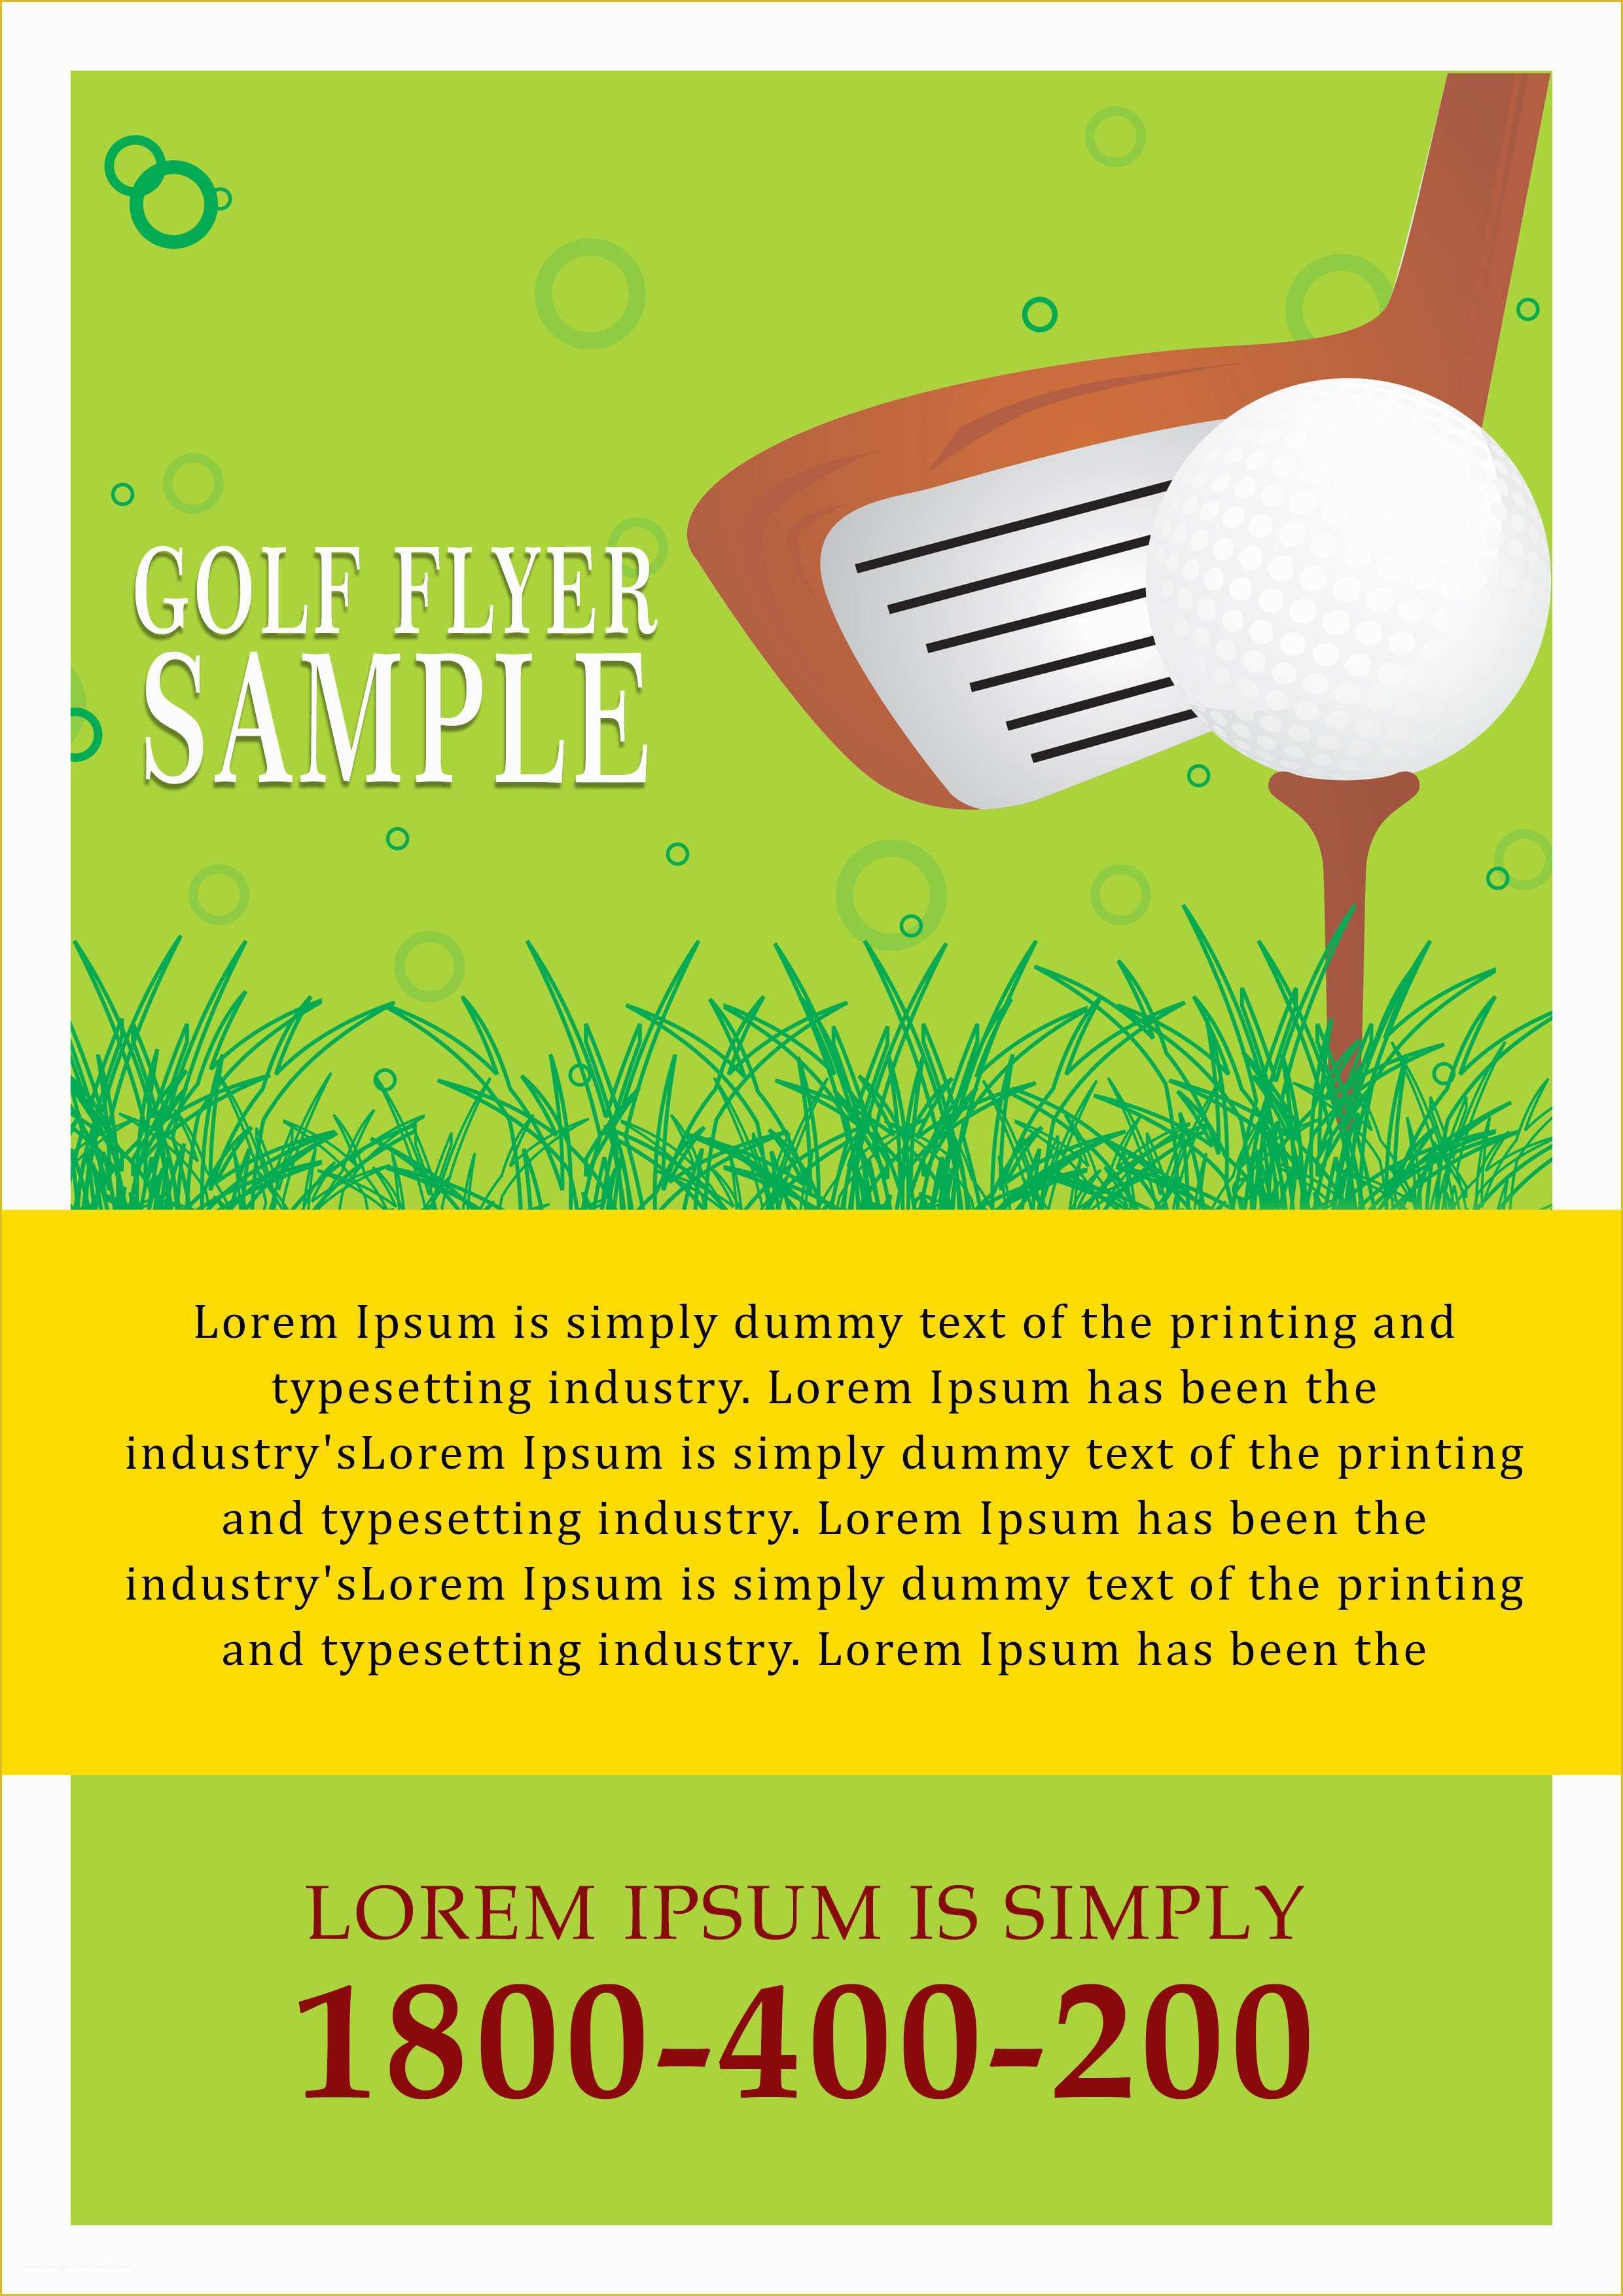 Free Golf Outing Flyer Template Of 15 Free Golf tournament Flyer Templates Fundraiser